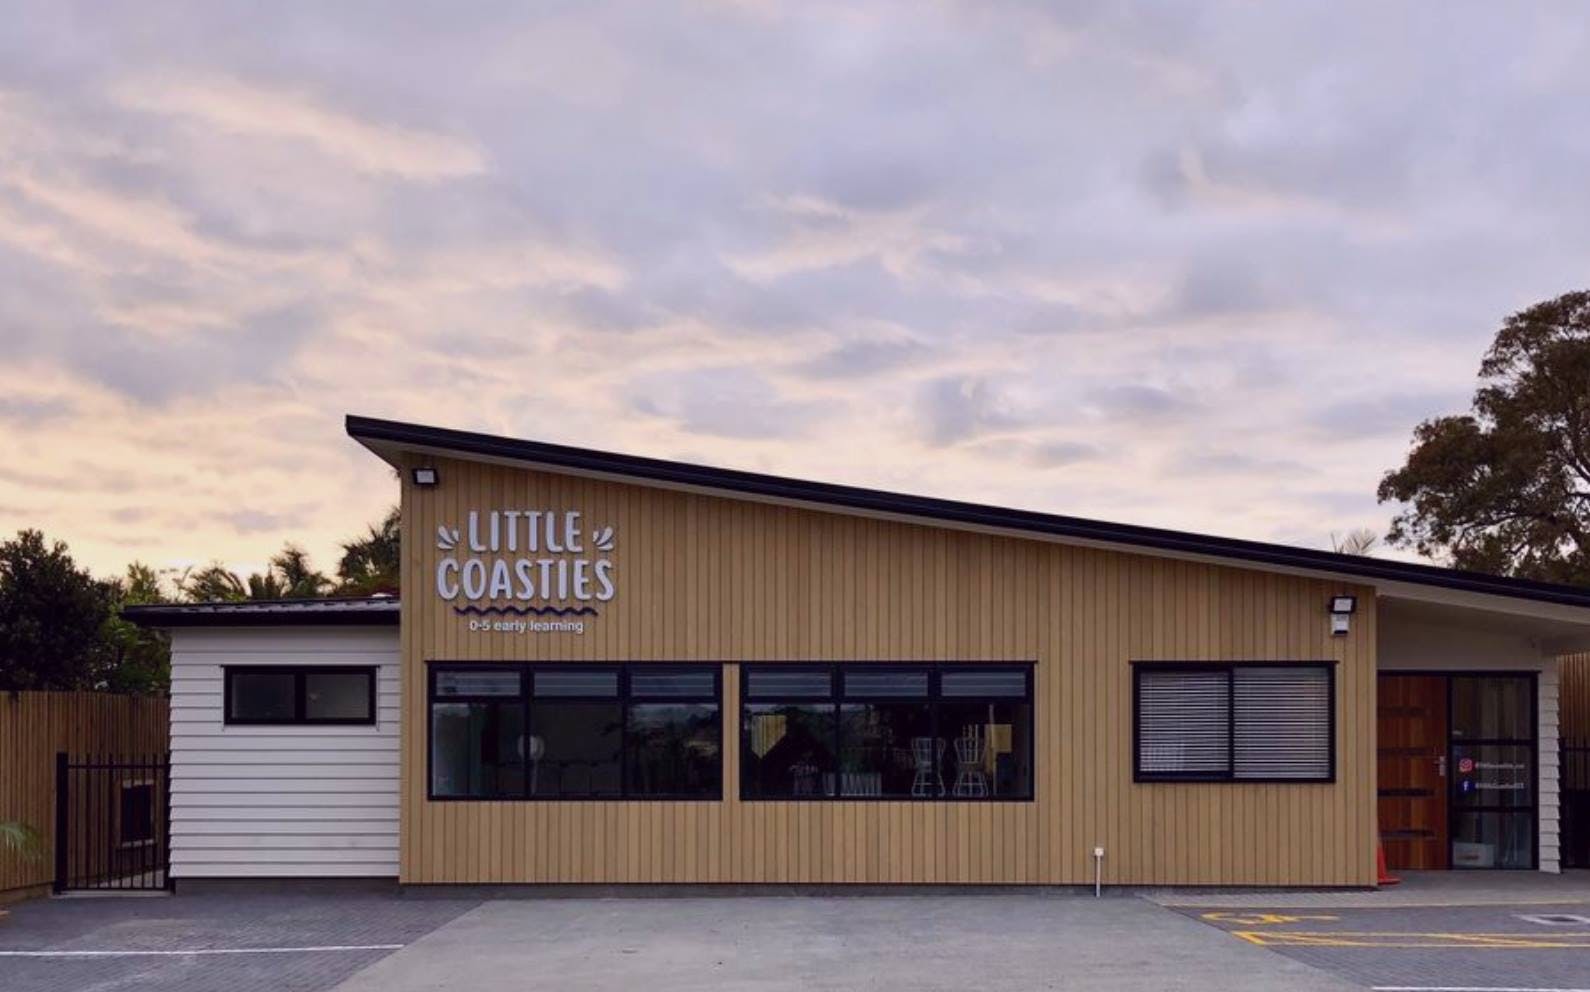 A picture of Little Coasties By Busy Bees 